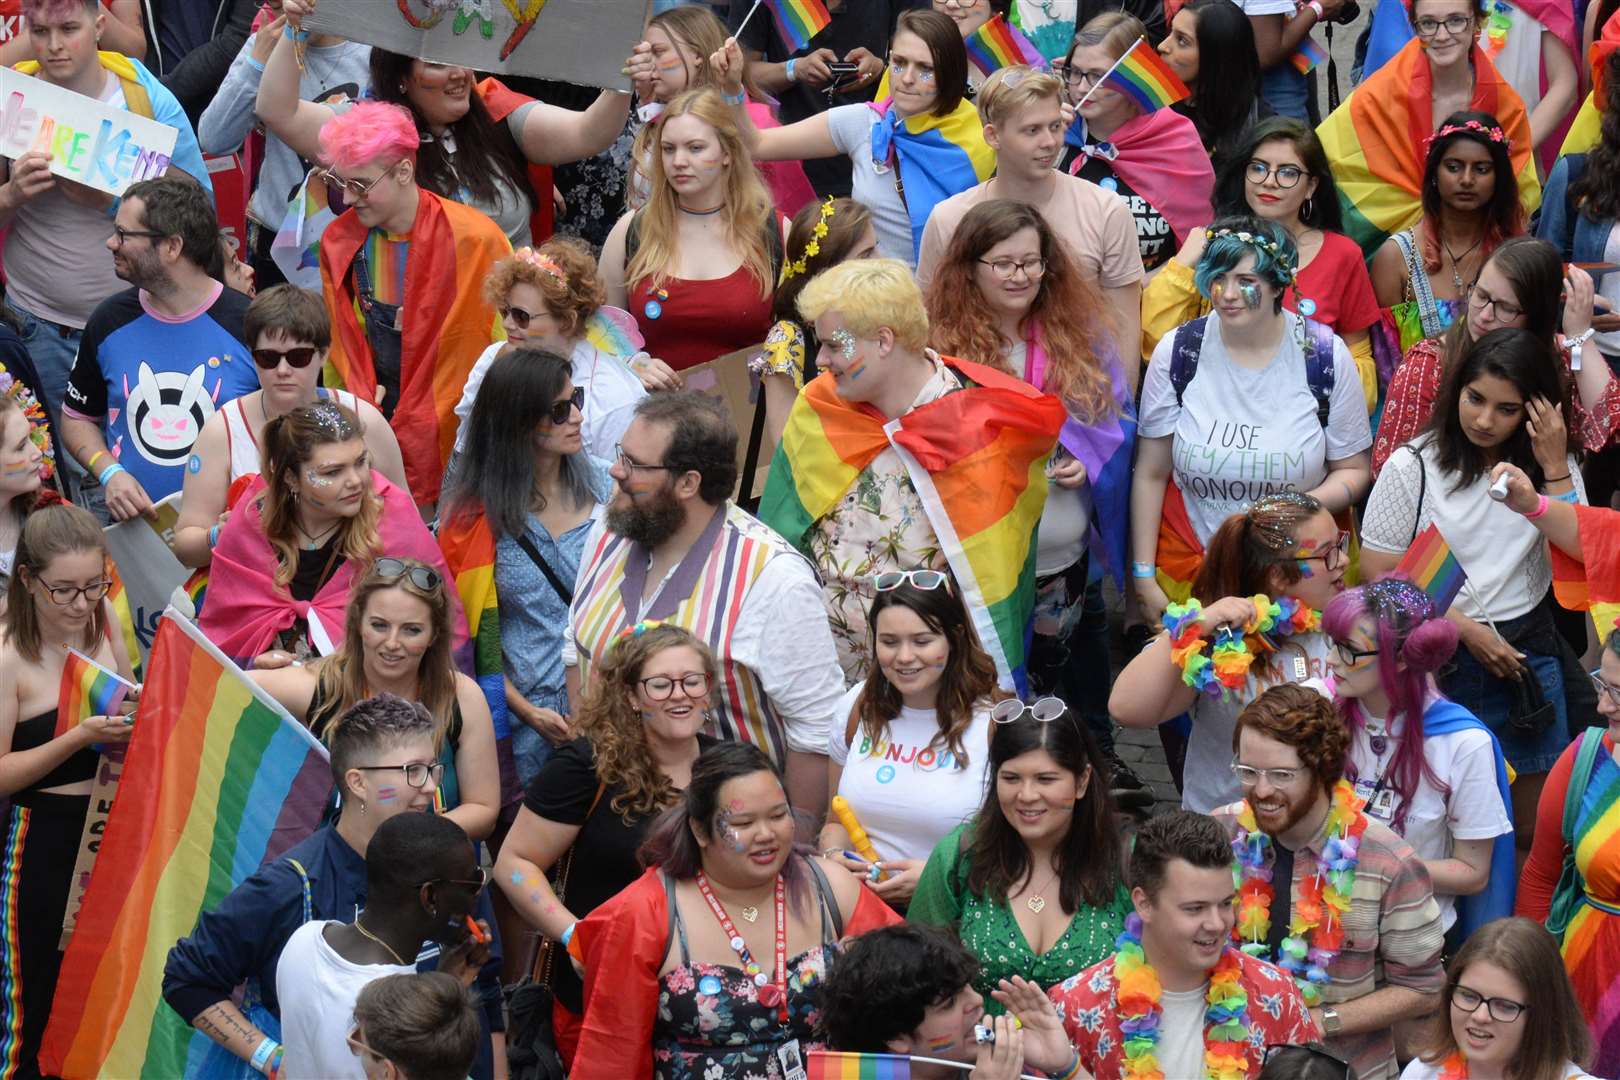 Canterbury had its own Gay Pride march in June, but Medway says it can't afford to organise one. Picture: Chris Davey.